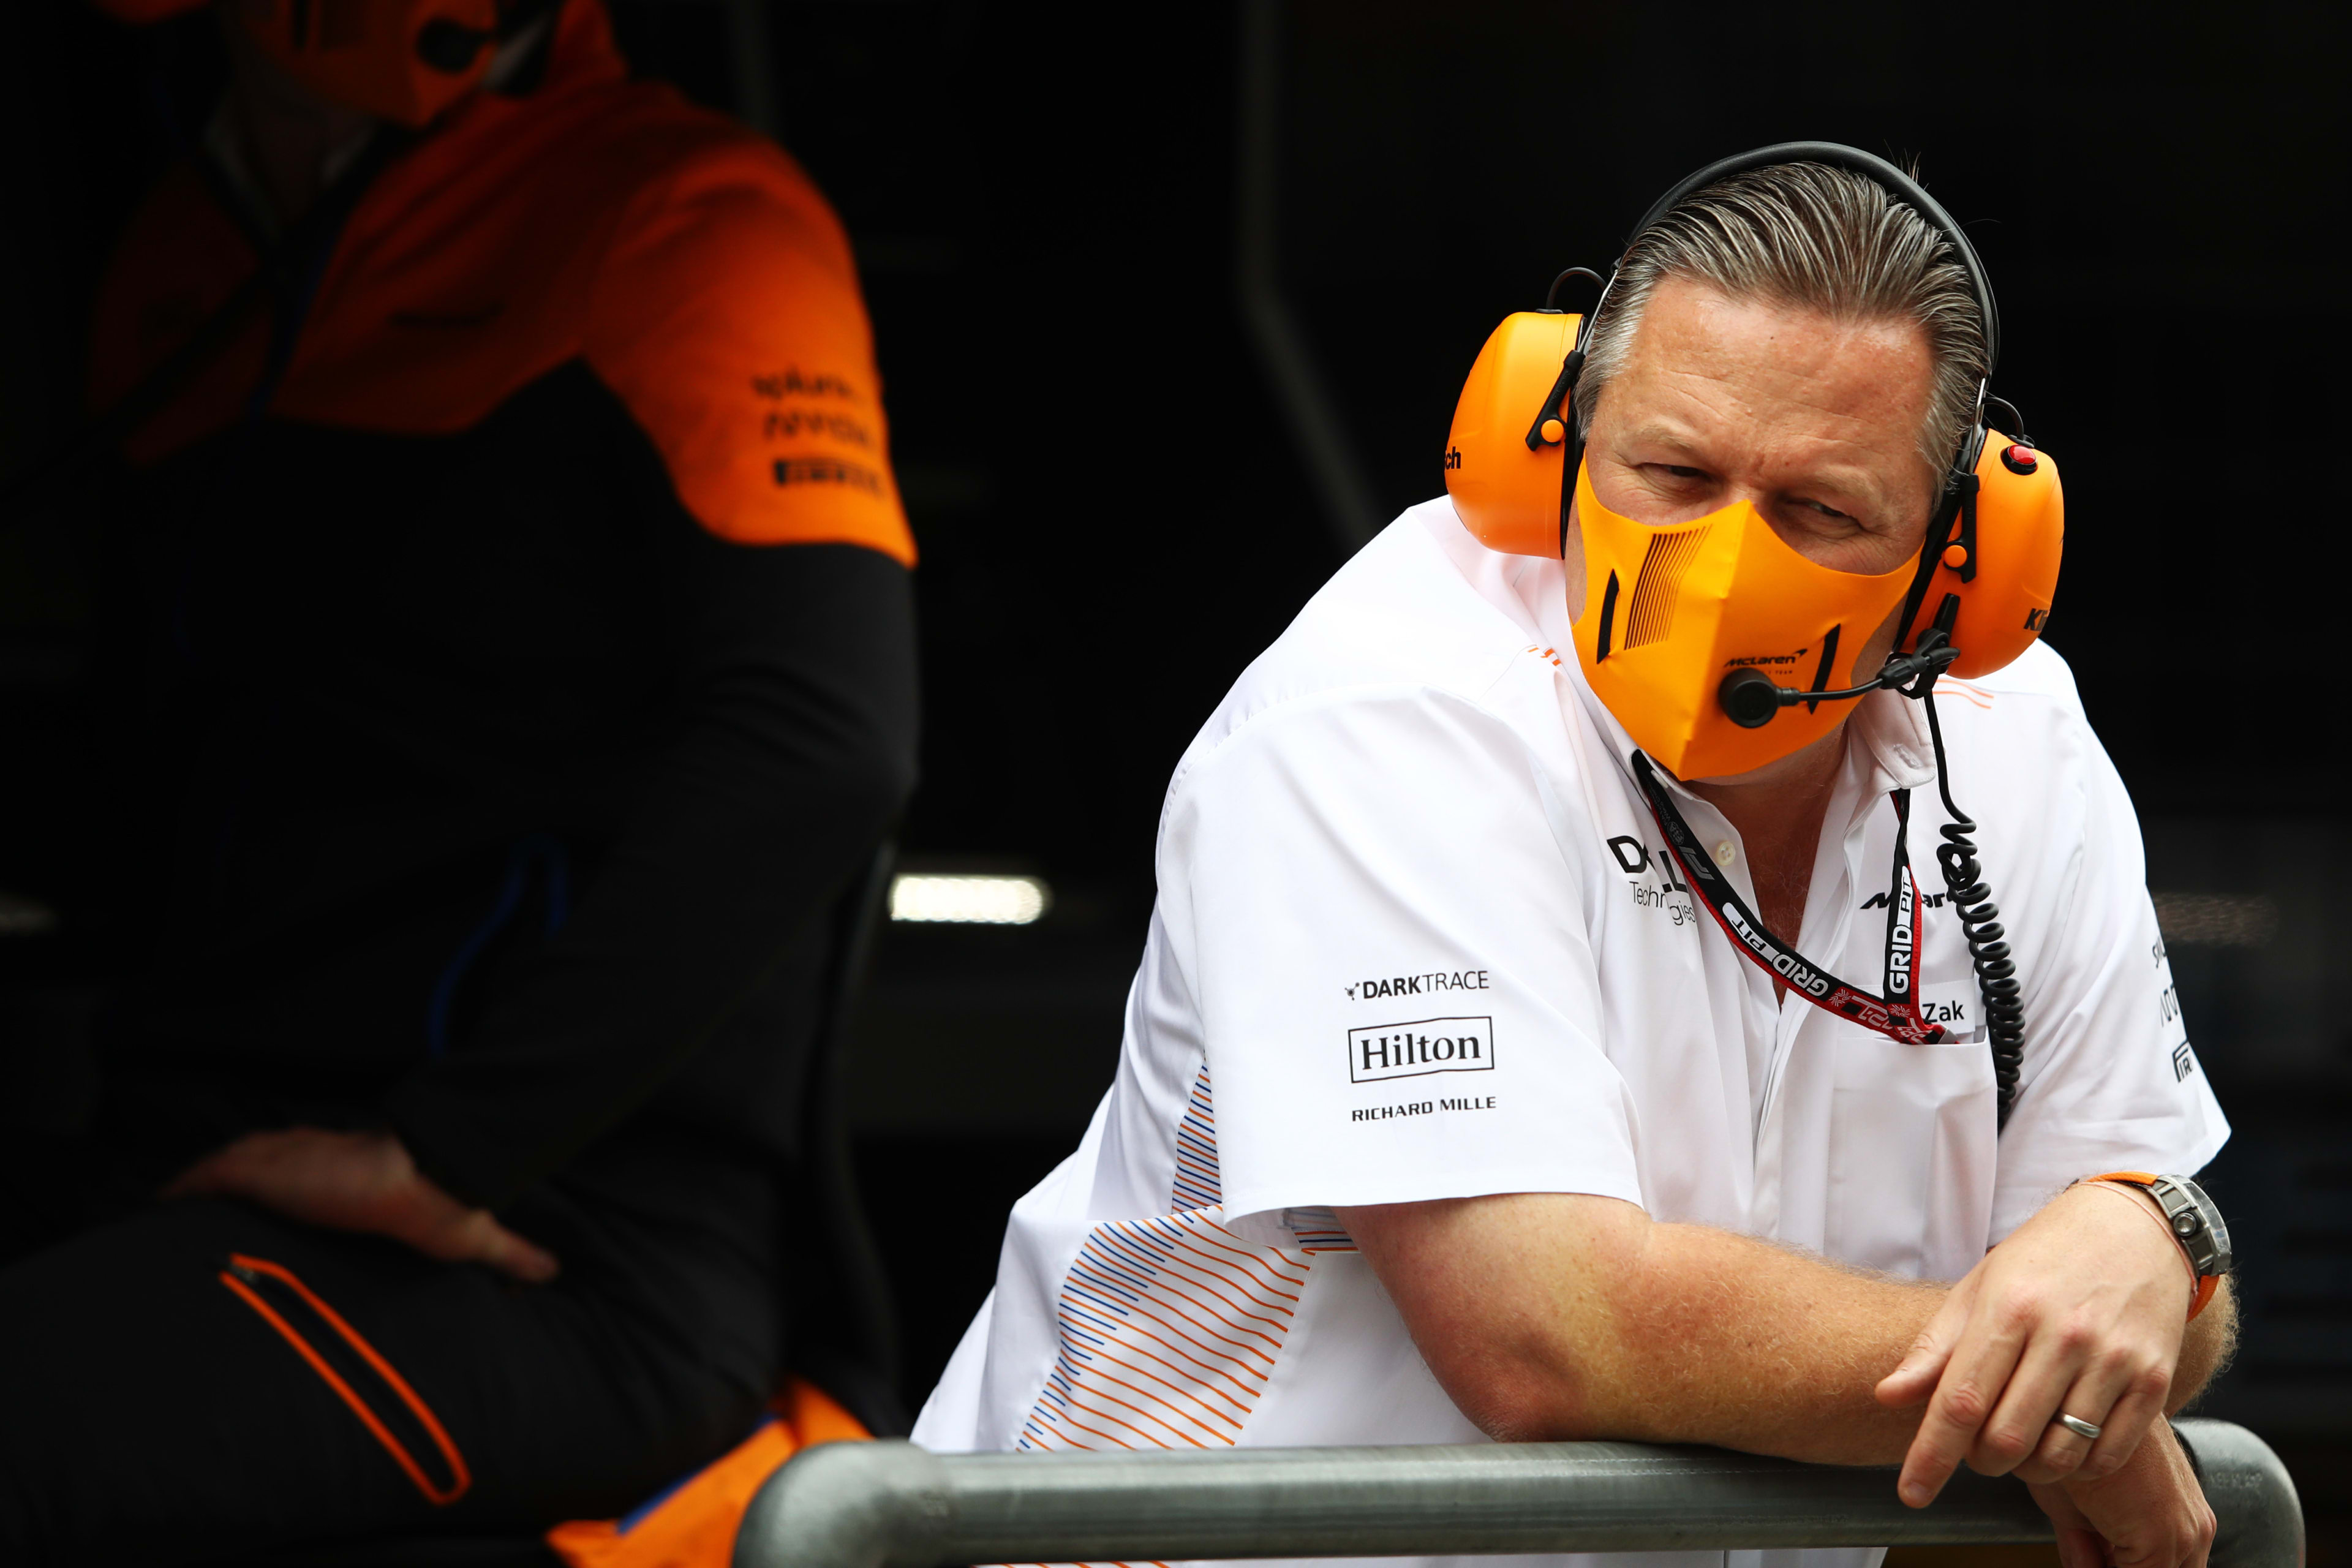 Zak Brown Q&A: On the Monza 1-2, racing in the US, and McLaren's path back  to the top | Formula 1®